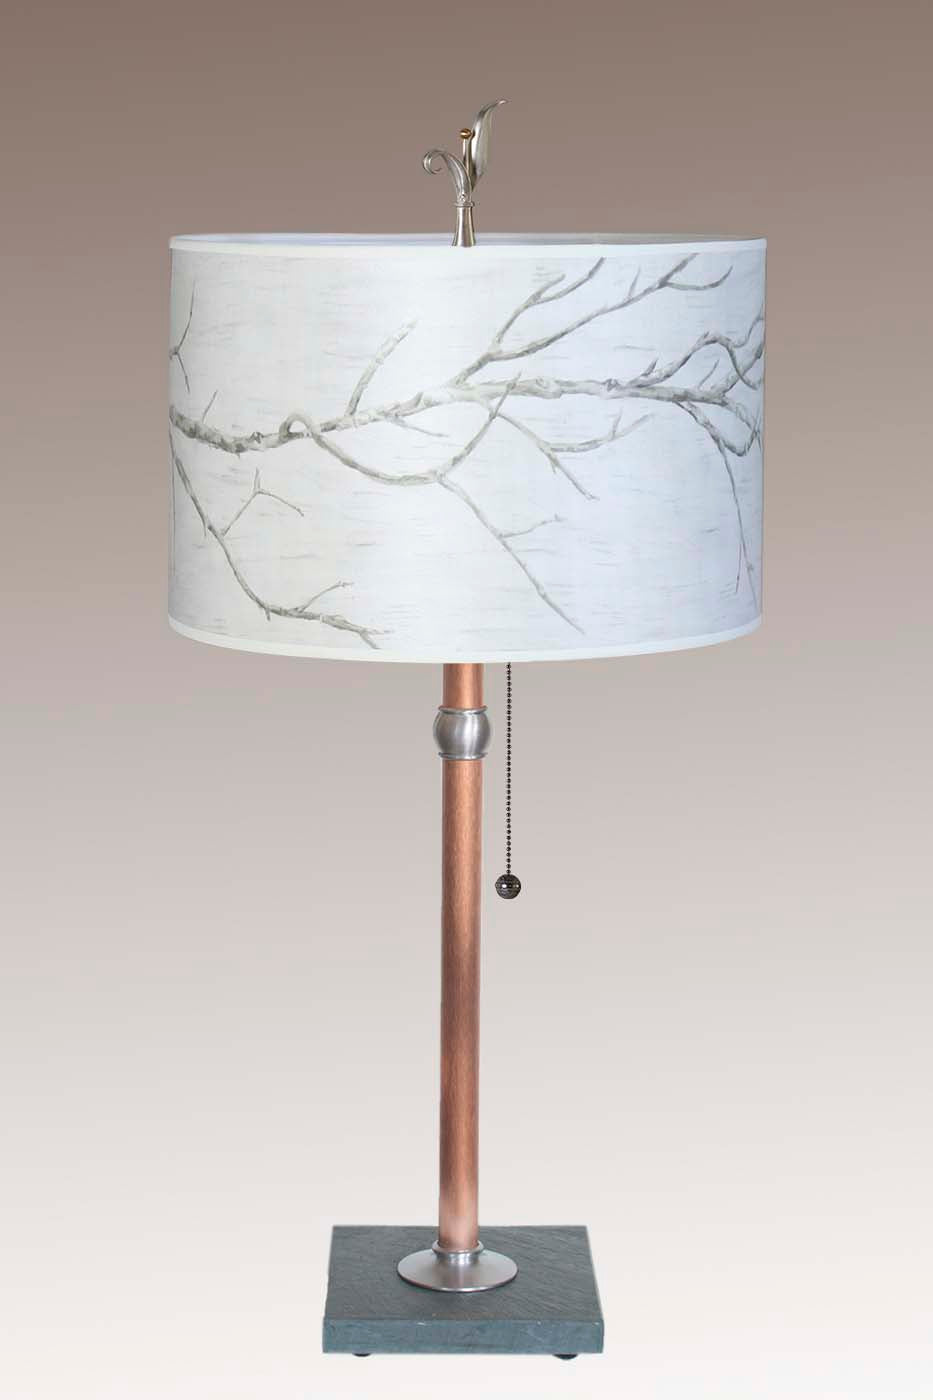 Janna Ugone & Co Table Lamp Copper Table Lamp with Large Drum Shade in Sweeping Branch